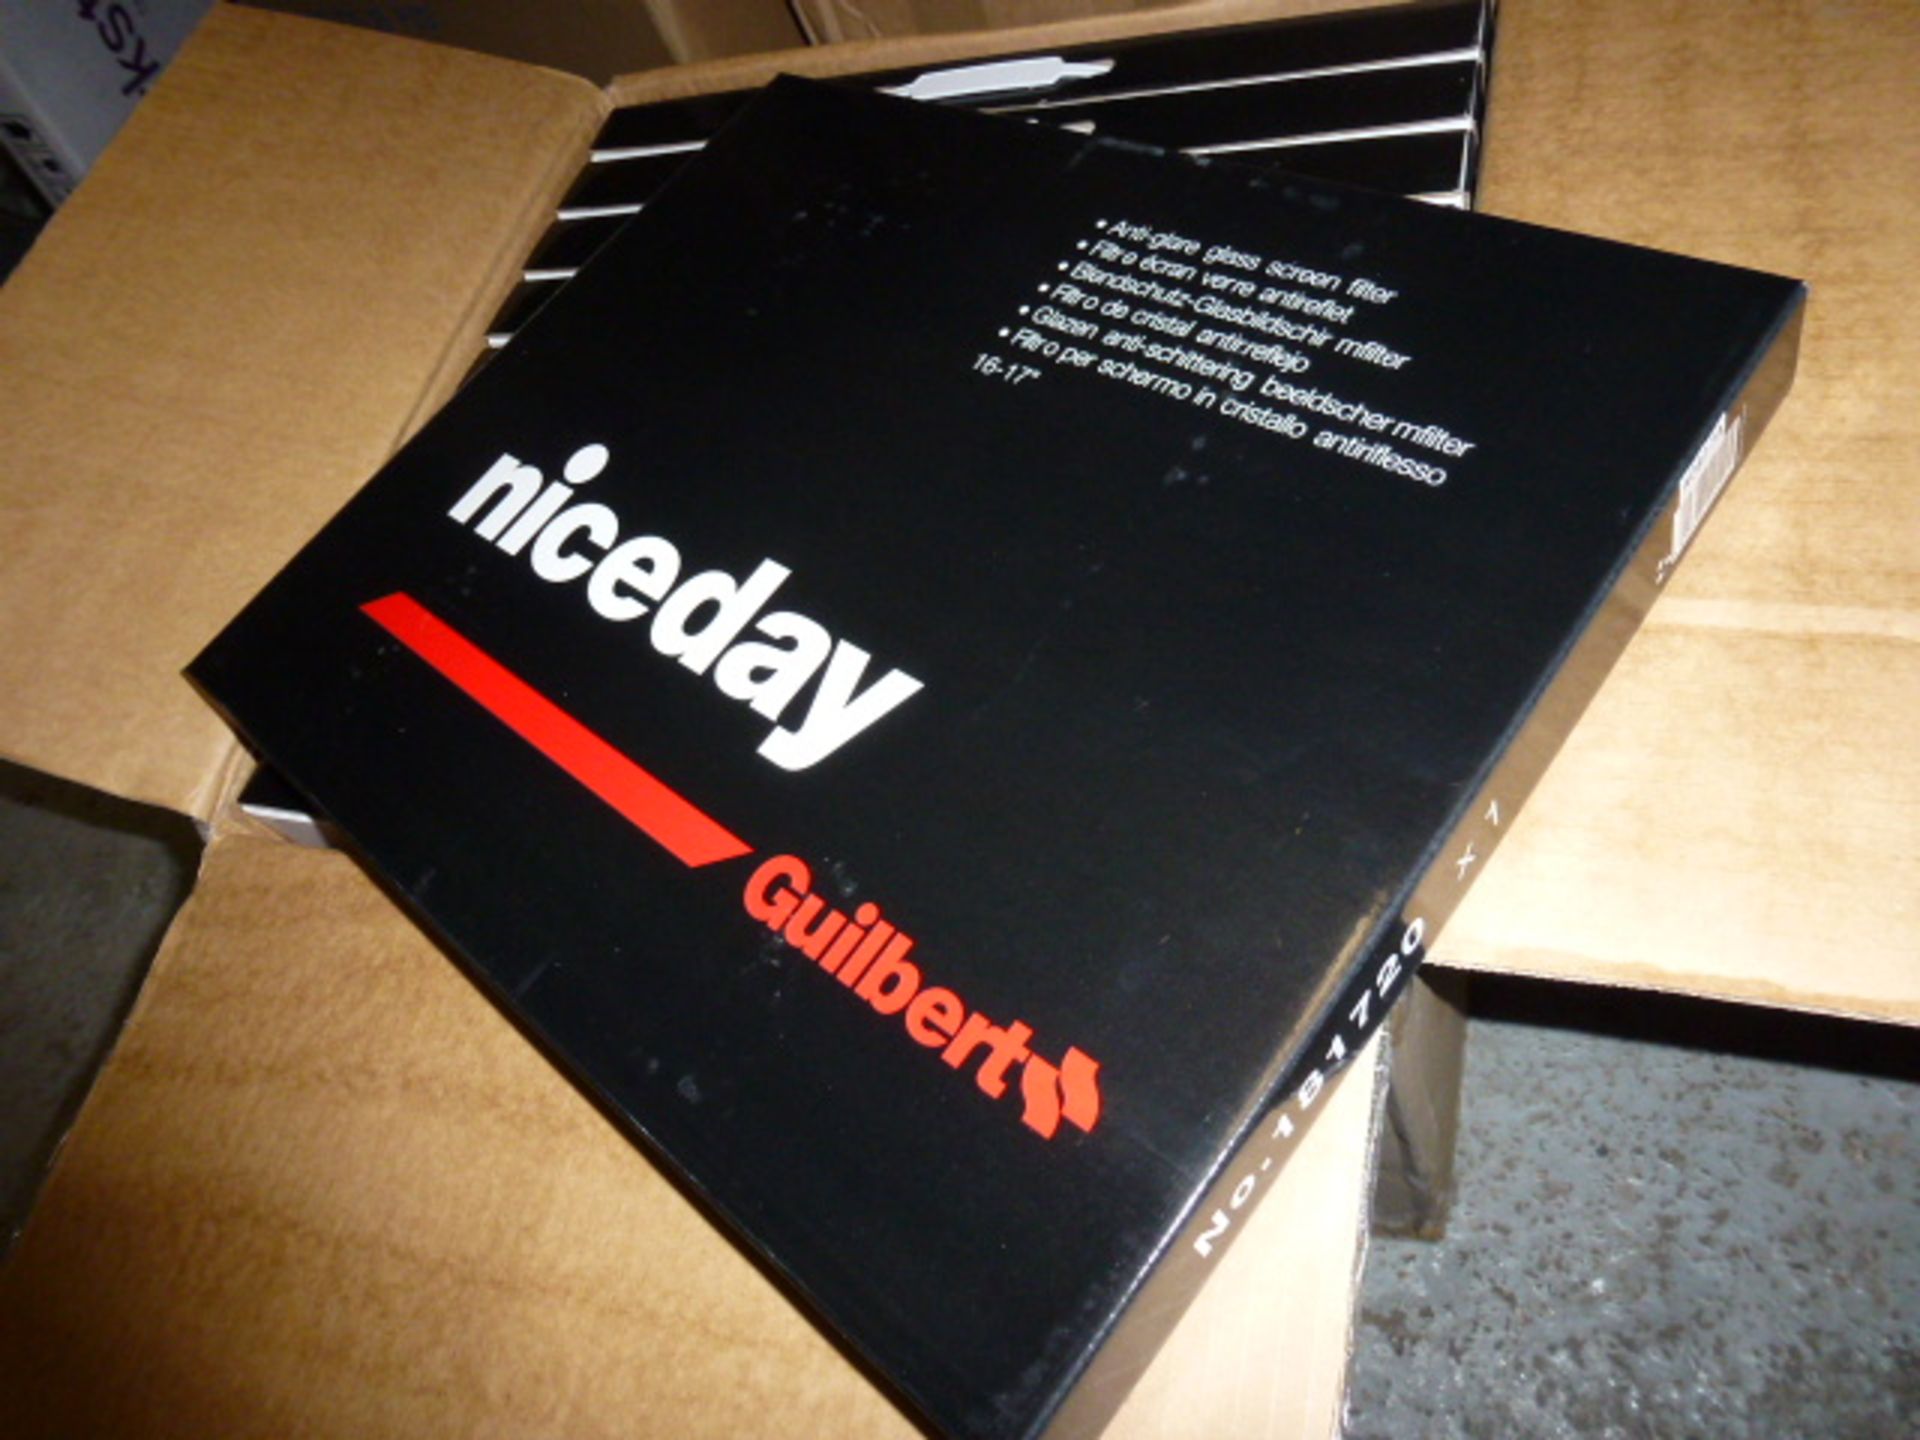 5 x Guilbert Niceday ANTI-GLARE SCREEN FILTERS For 16-17 Inch PC Monitors - Suitable For TFT or - Image 5 of 7